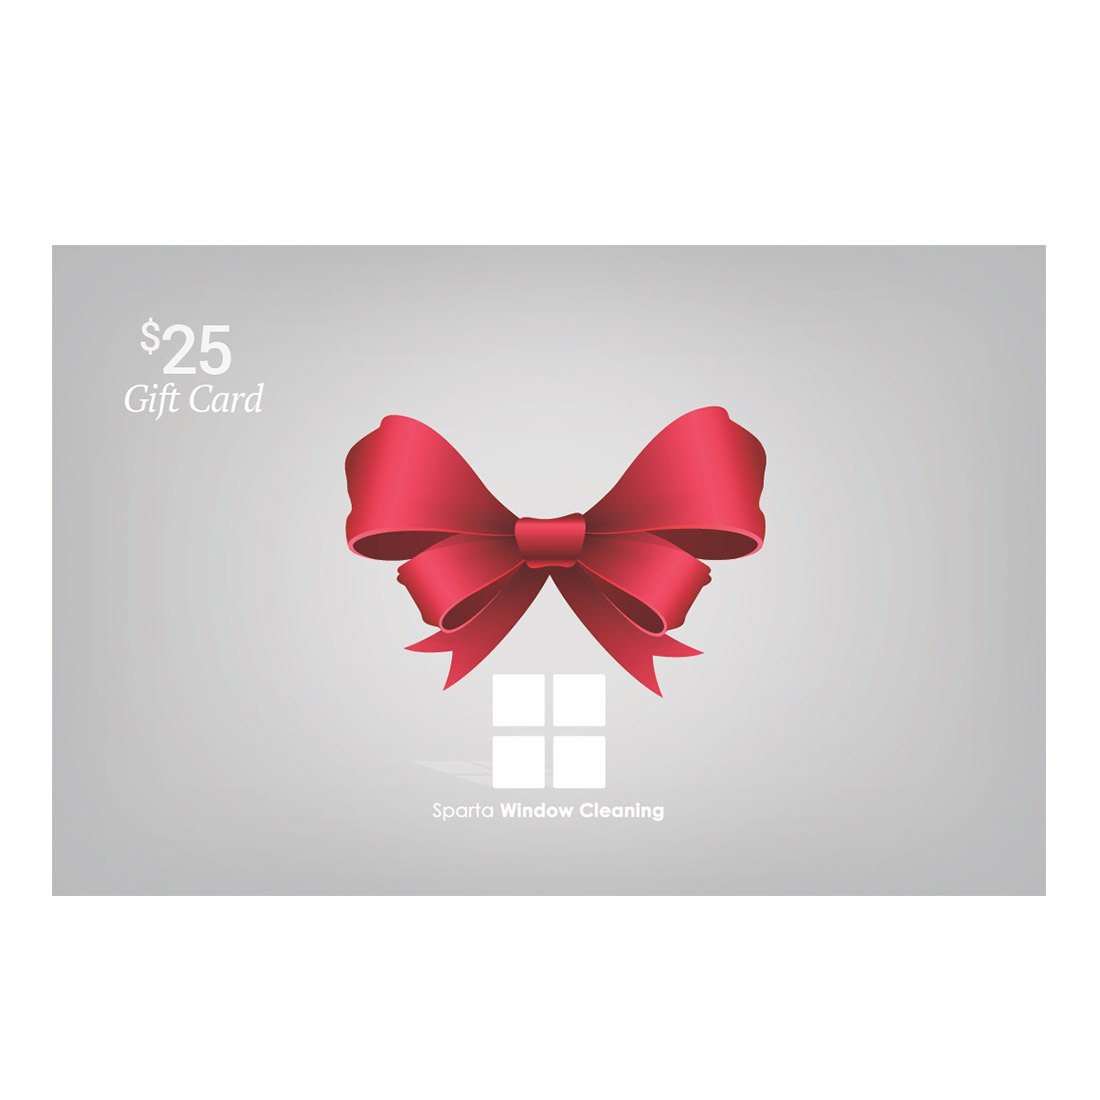 Gift Card Designs - Red Bow - Front View